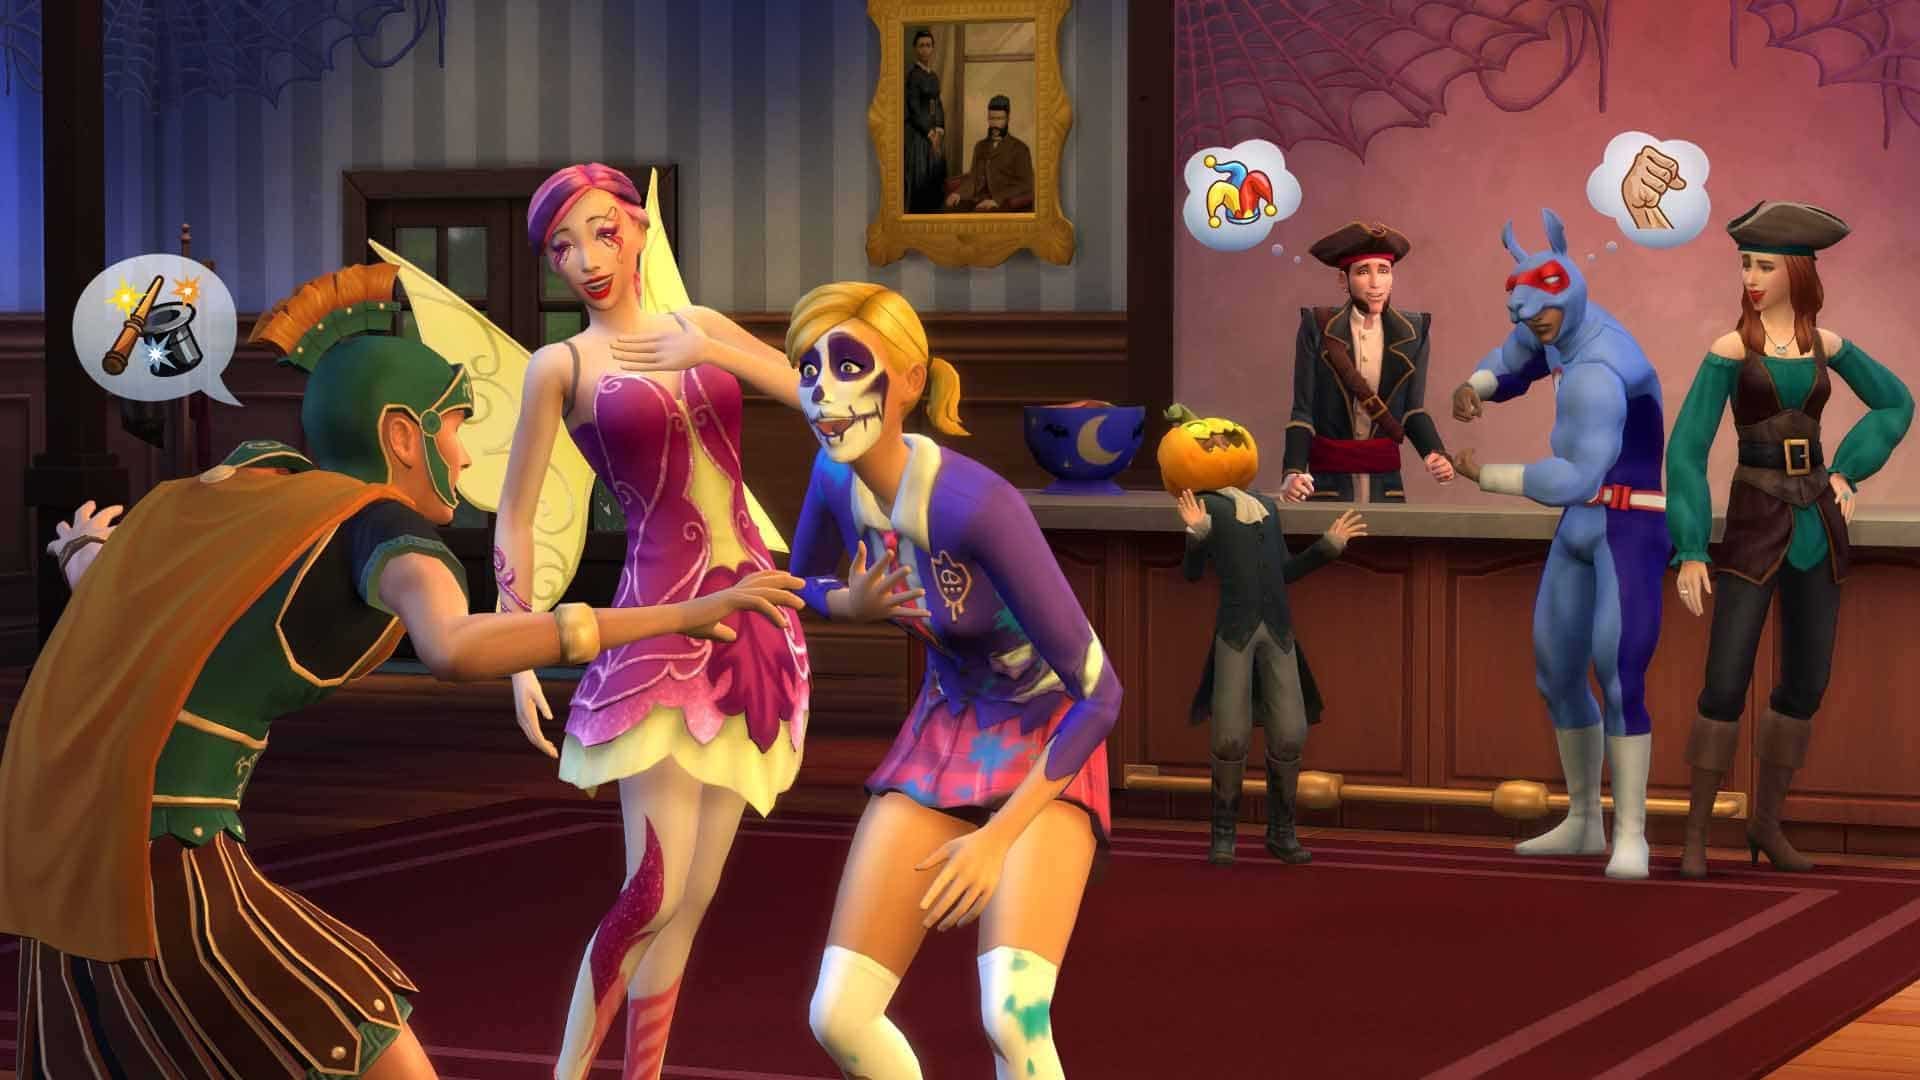 Sims 4 Checks, PDF, Cheating In Video Games